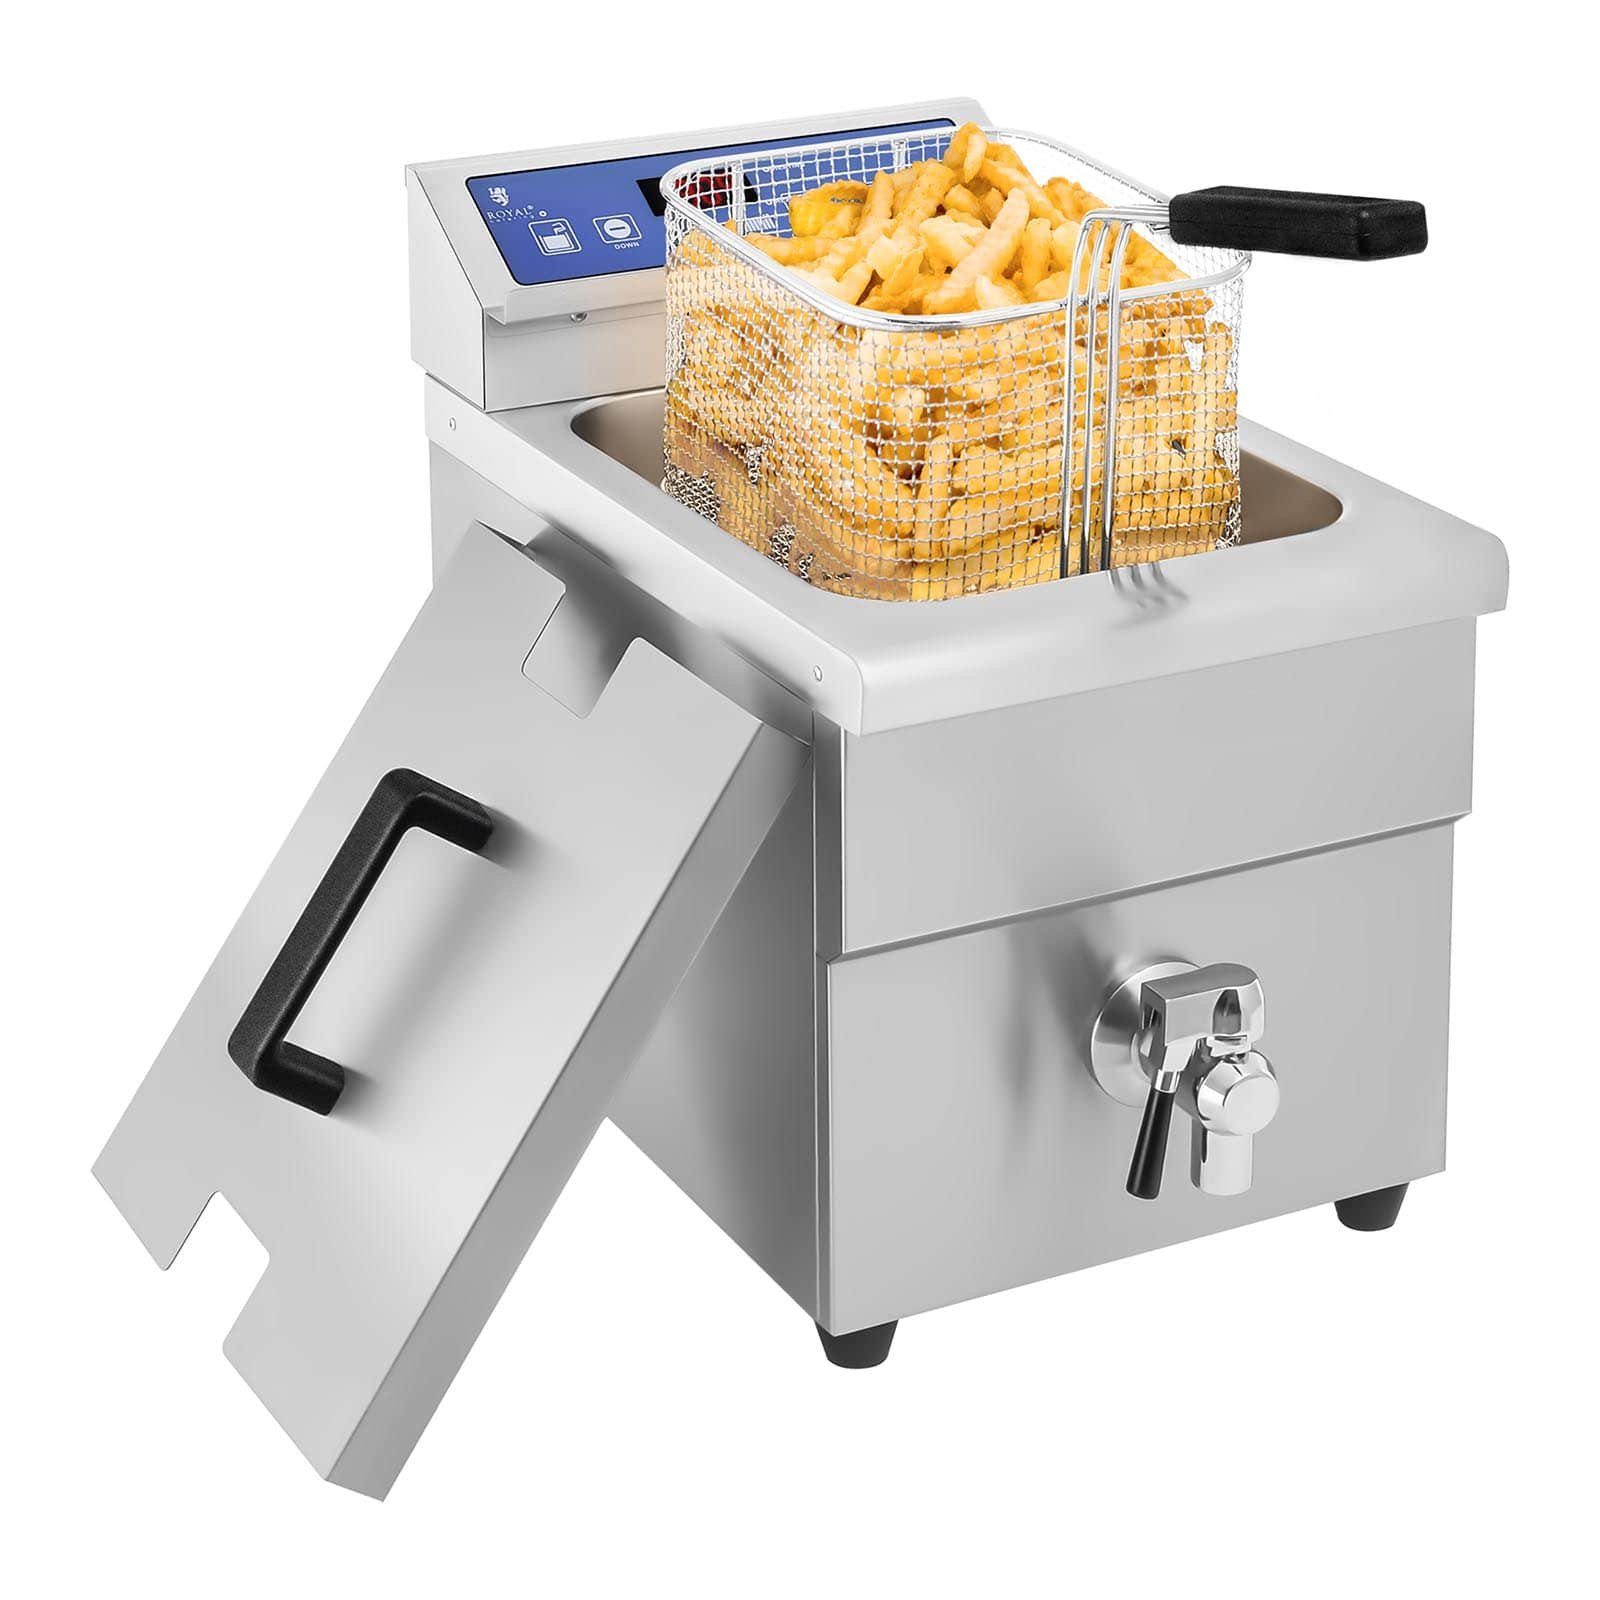 L Fritteuse Elektro, Friteuse 3500 W Fritöse Induktionsfritteuse 10 Royal Catering Fritteuse